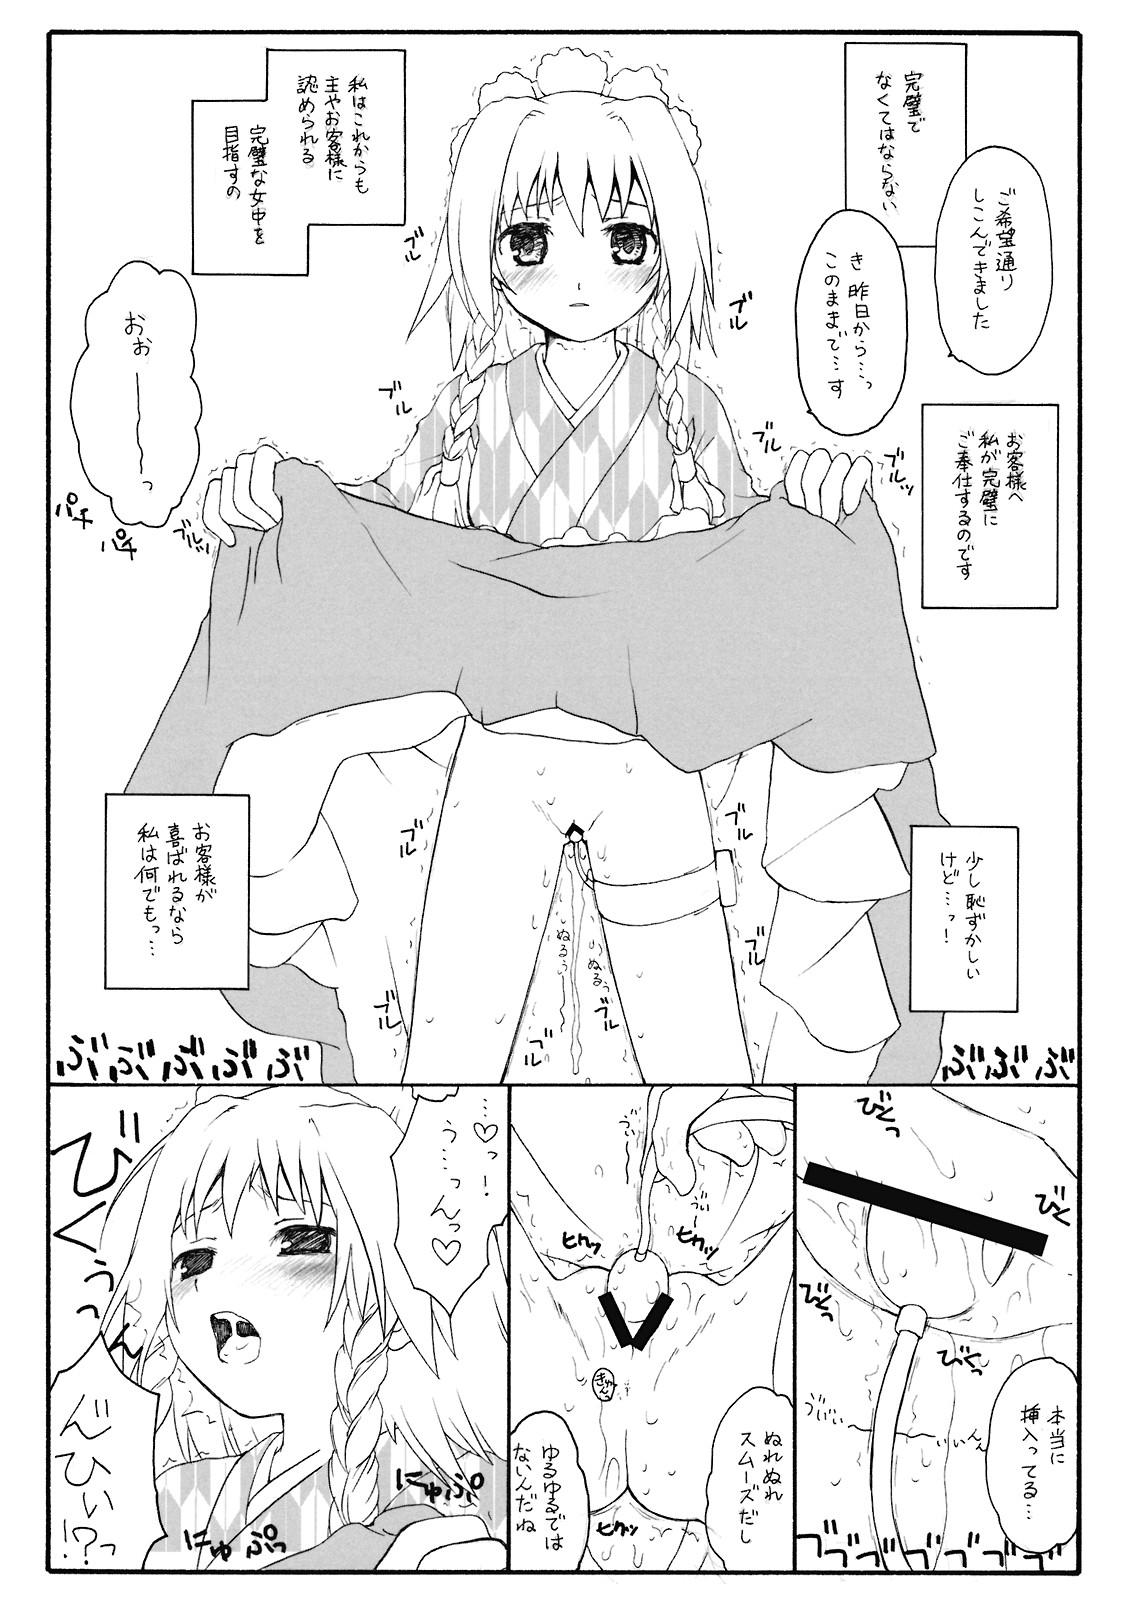 Female Domination Aru Omise no Ichinichi Sono 4 - Touhou project Casting - Page 6